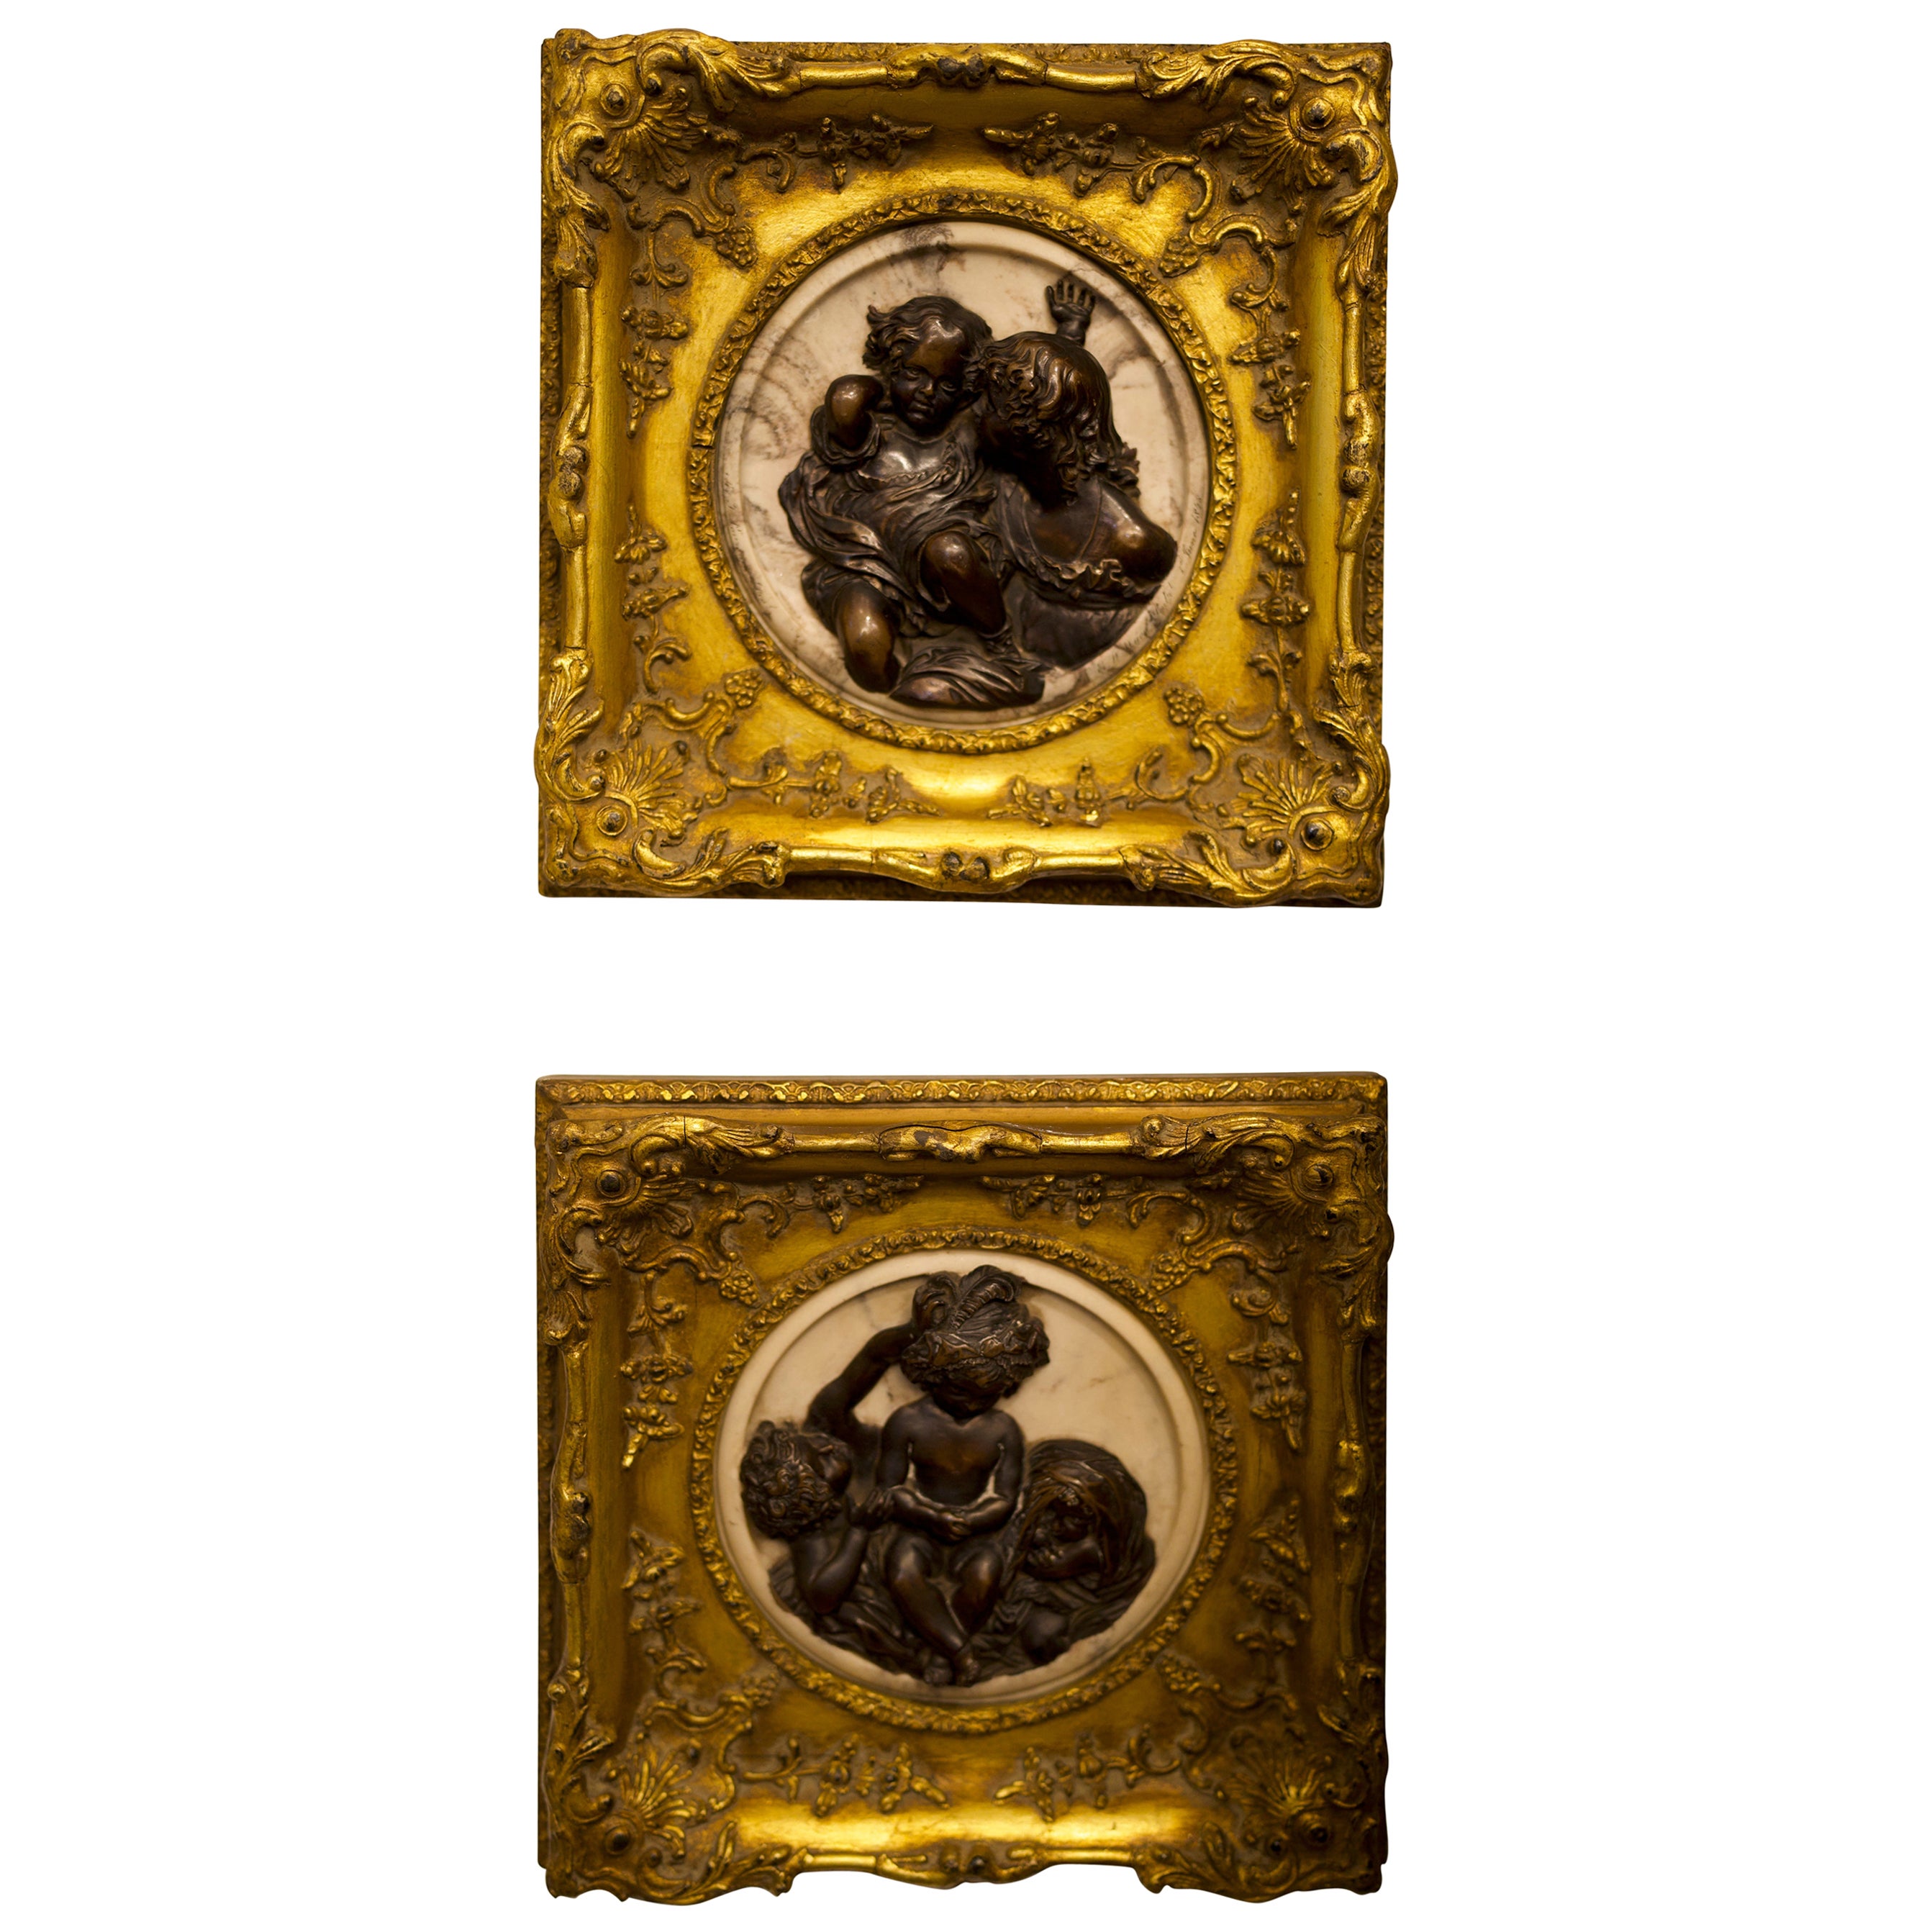 French Marble, Bronze and Giltwood Cameo Wall Art, Early 20th Century